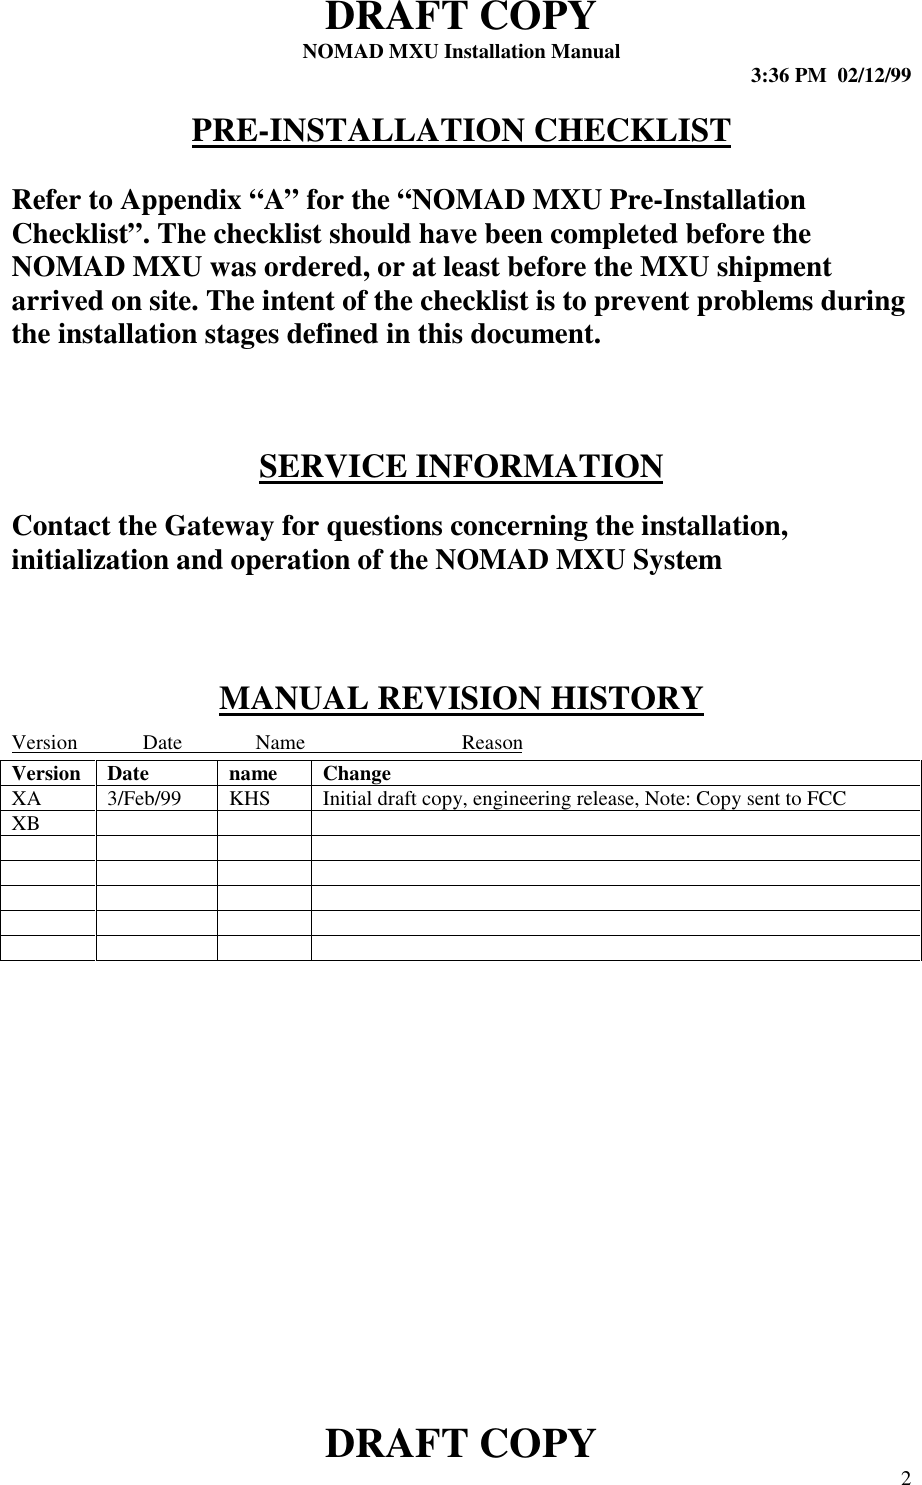 DRAFT COPYNOMAD MXU Installation Manual 3:36 PM  02/12/99DRAFT COPY 2PRE-INSTALLATION CHECKLISTRefer to Appendix “A” for the “NOMAD MXU Pre-InstallationChecklist”. The checklist should have been completed before theNOMAD MXU was ordered, or at least before the MXU shipmentarrived on site. The intent of the checklist is to prevent problems duringthe installation stages defined in this document.SERVICE INFORMATIONContact the Gateway for questions concerning the installation,initialization and operation of the NOMAD MXU SystemMANUAL REVISION HISTORYVersion             Date              Name                              ReasonVersion Date name ChangeXA 3/Feb/99 KHS Initial draft copy, engineering release, Note: Copy sent to FCCXB